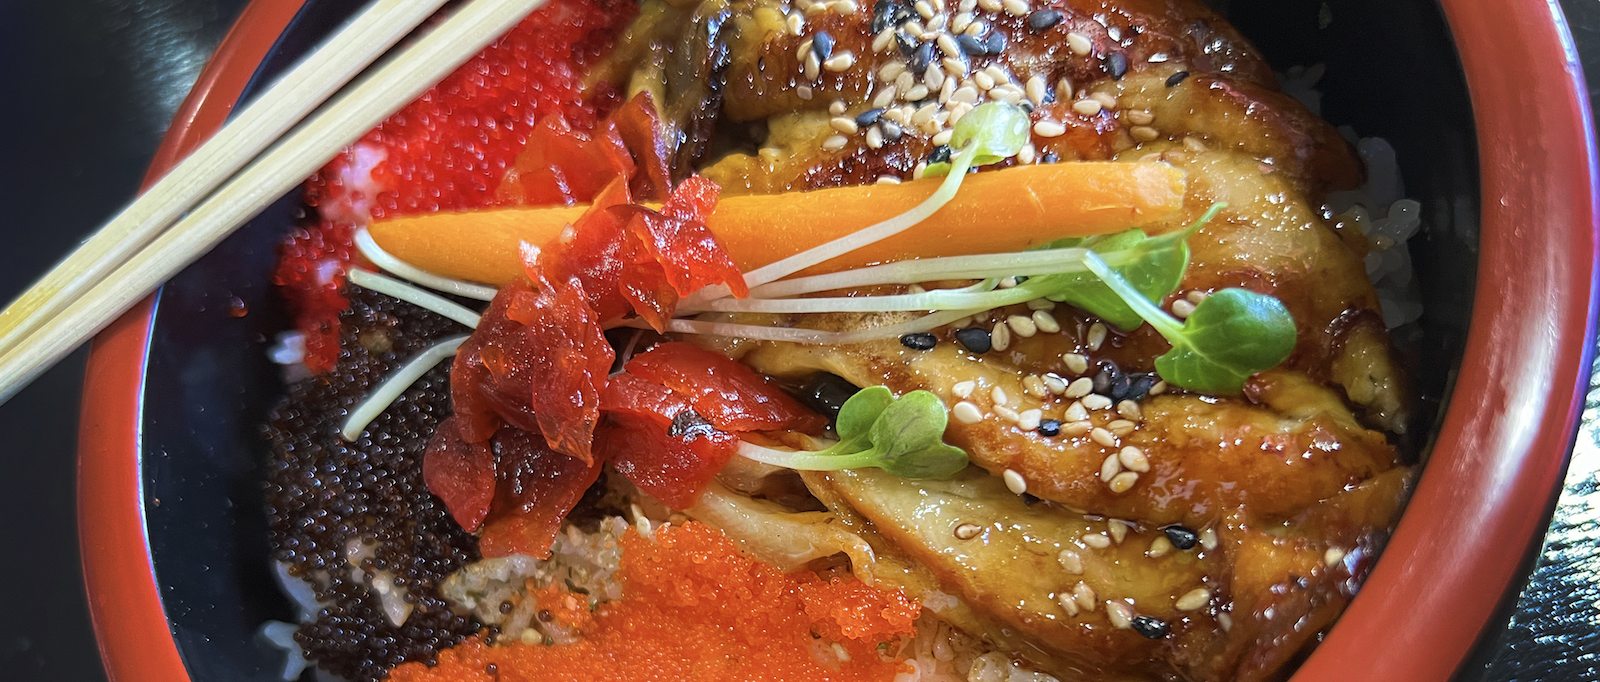 The unagi donburi is presented beautifully with colorful sections of eel, tobiko, and masago placed over subtly seasoned rice.